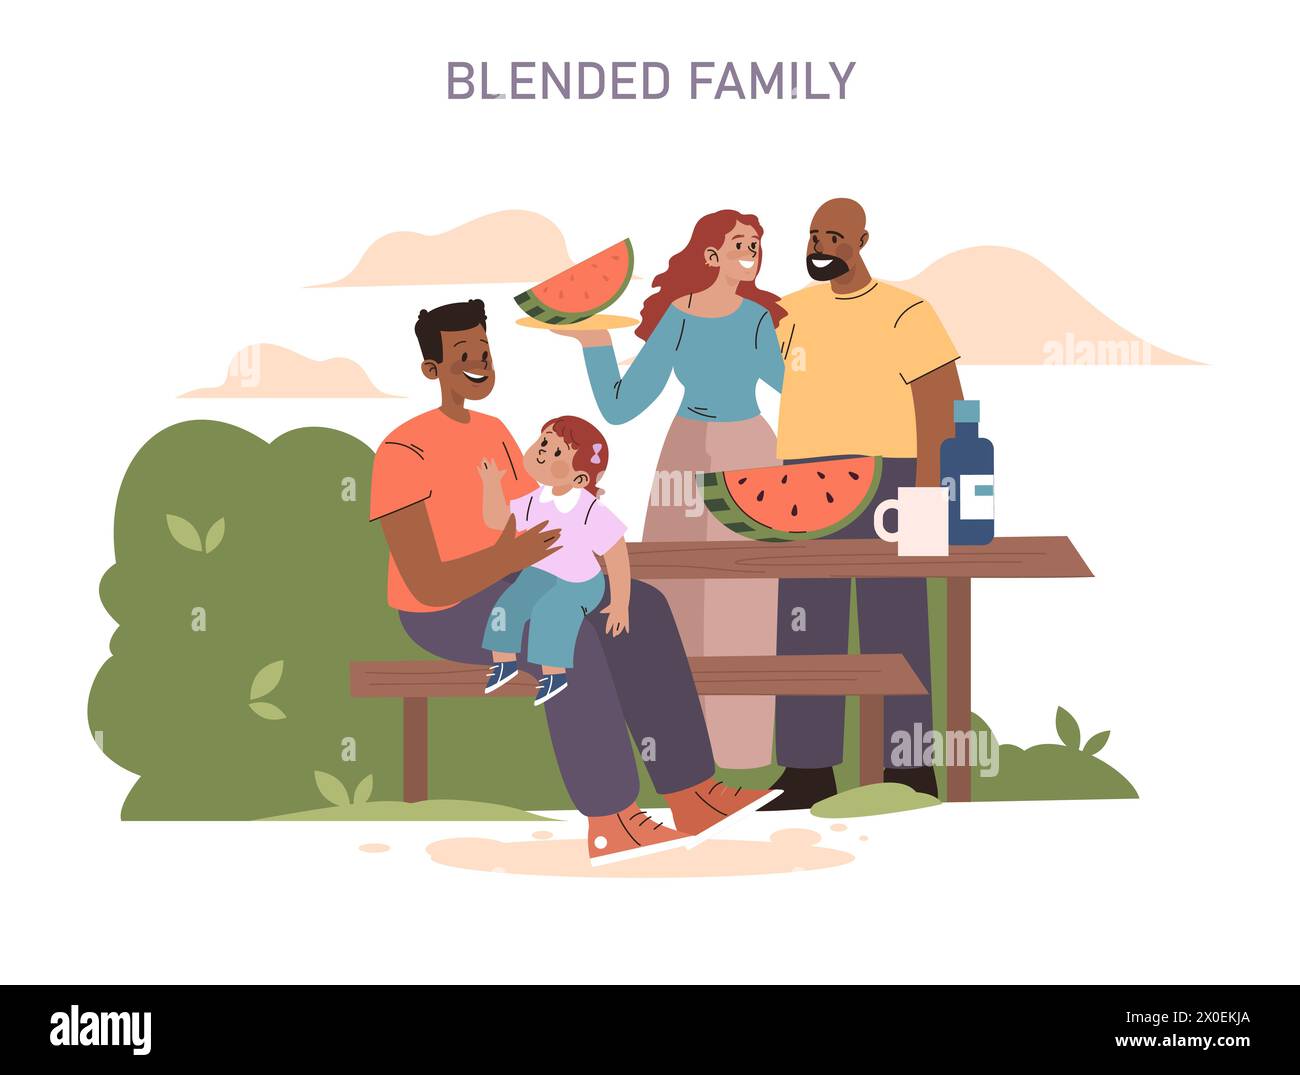 Blended Family concept. Harmonious picnic scene with diverse members enjoying time together. Unity in diversity, joyful moments. Stock Vector